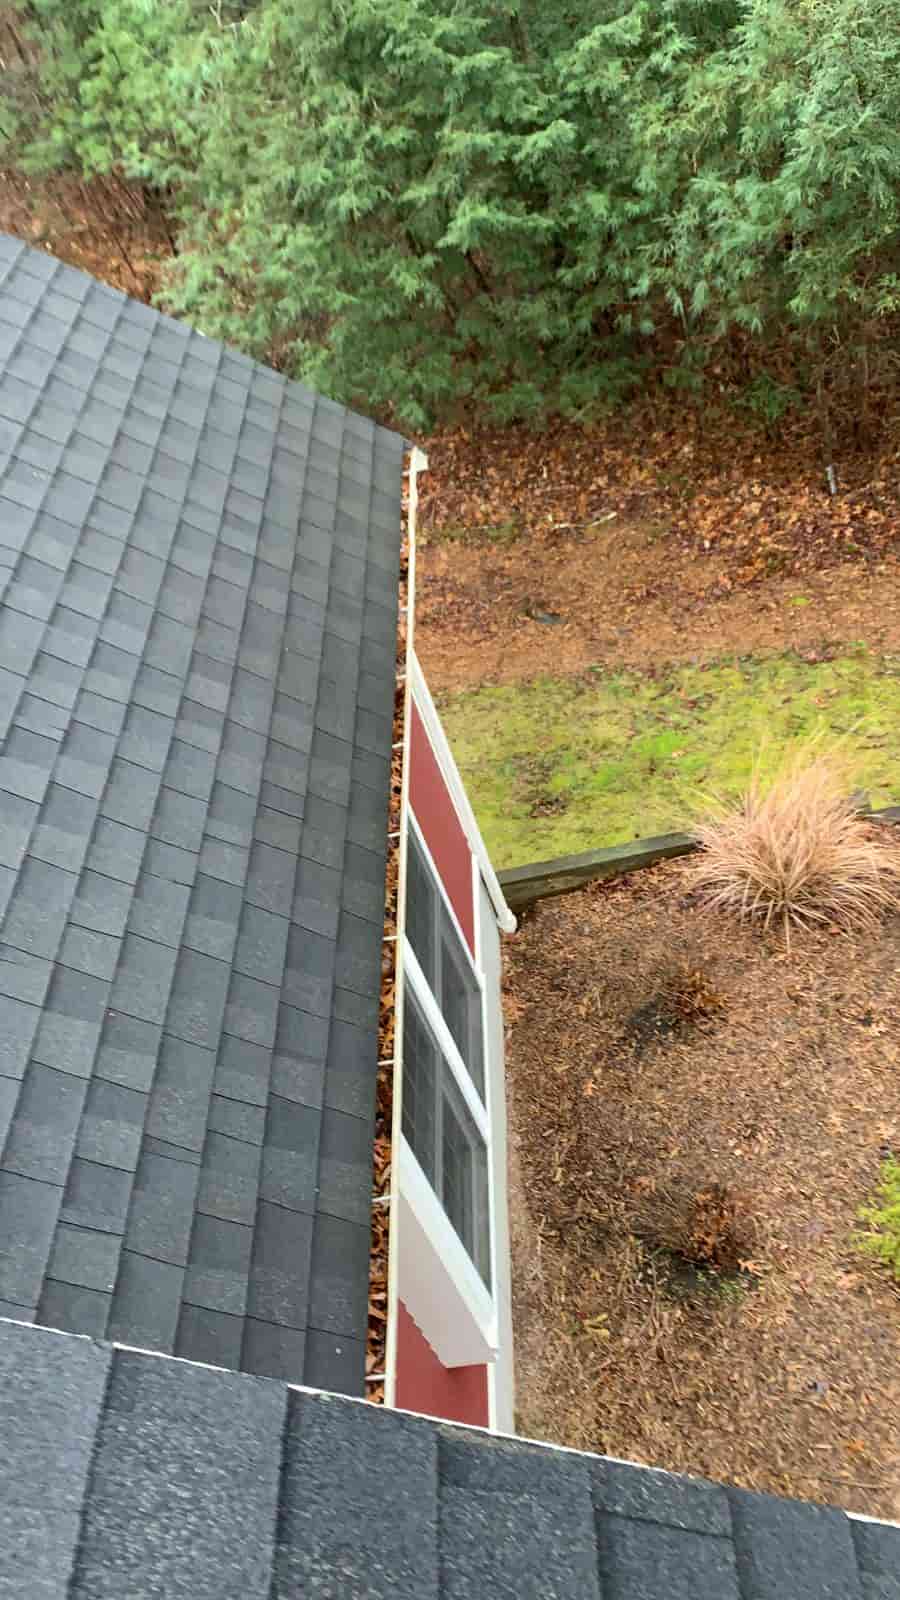 how to clean gutters 2 story house